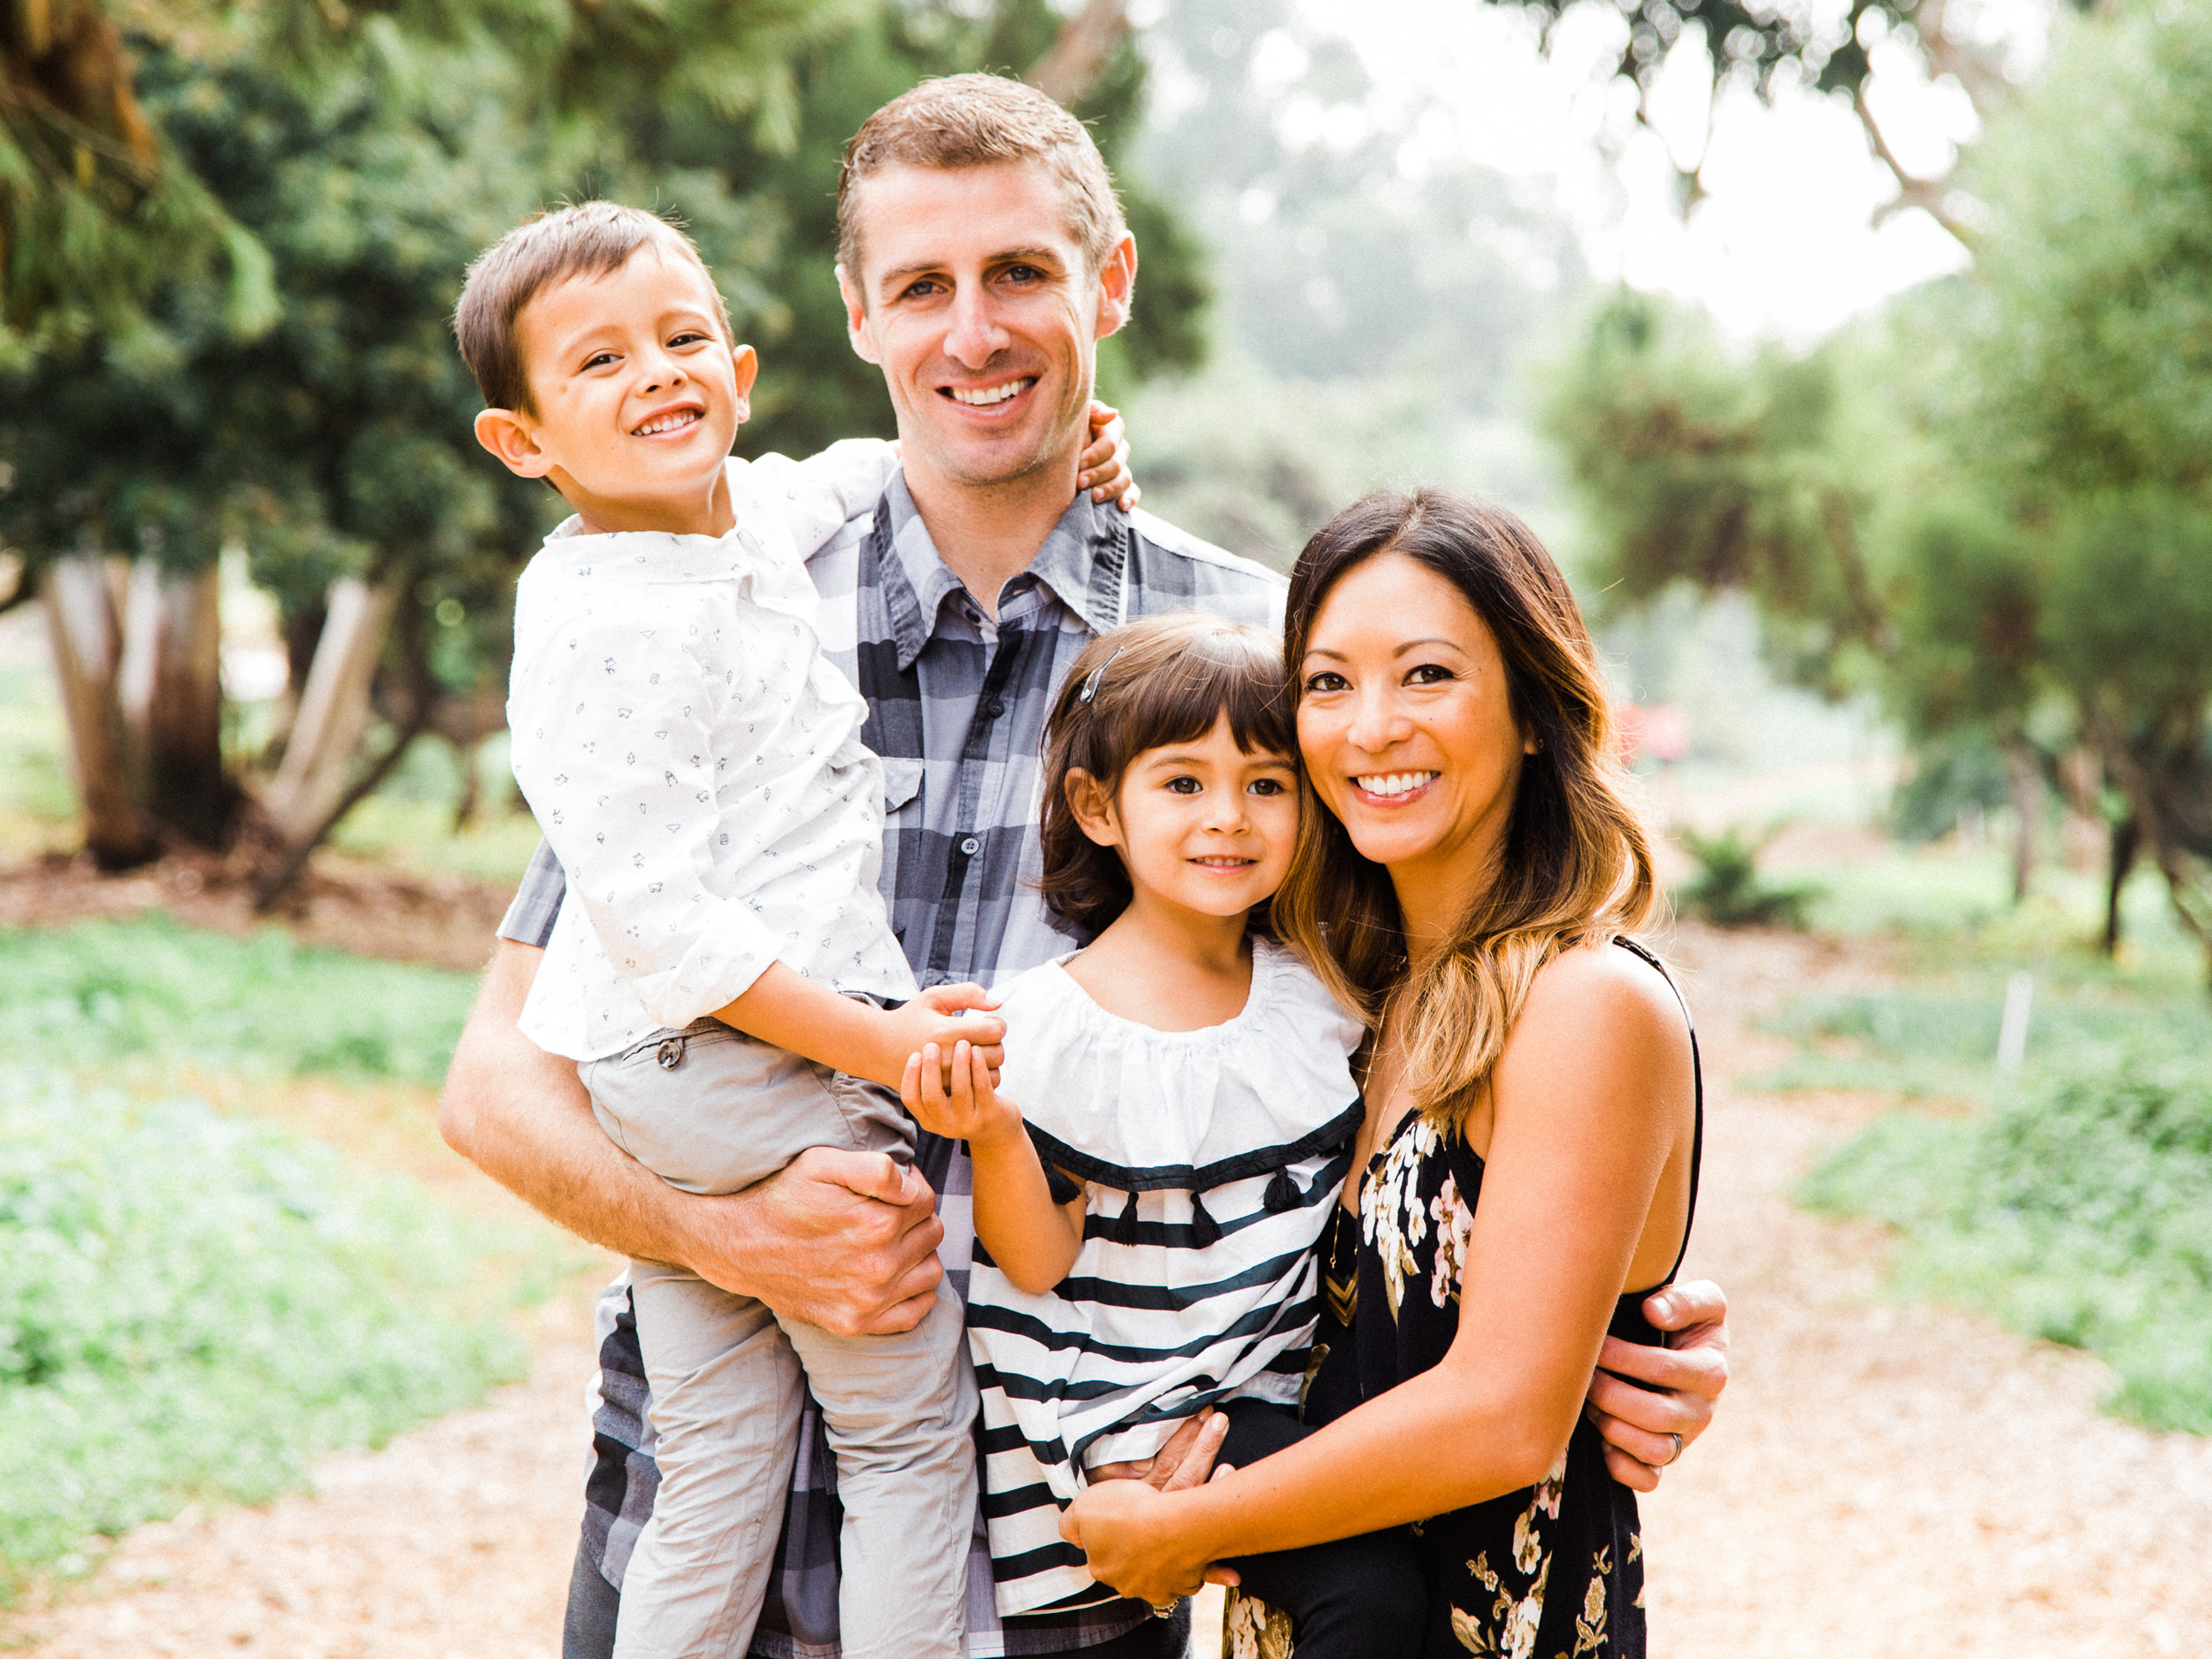  Valley Park Hermosa Beach Valley Park Hermosa Beach Family Portrait Photographs and Valley Park Hermosa Beach Family Portrait Photography from Fine Art Family Portrait Photographer, engagement photographer and Wedding Photographer Daniel Doty Photog